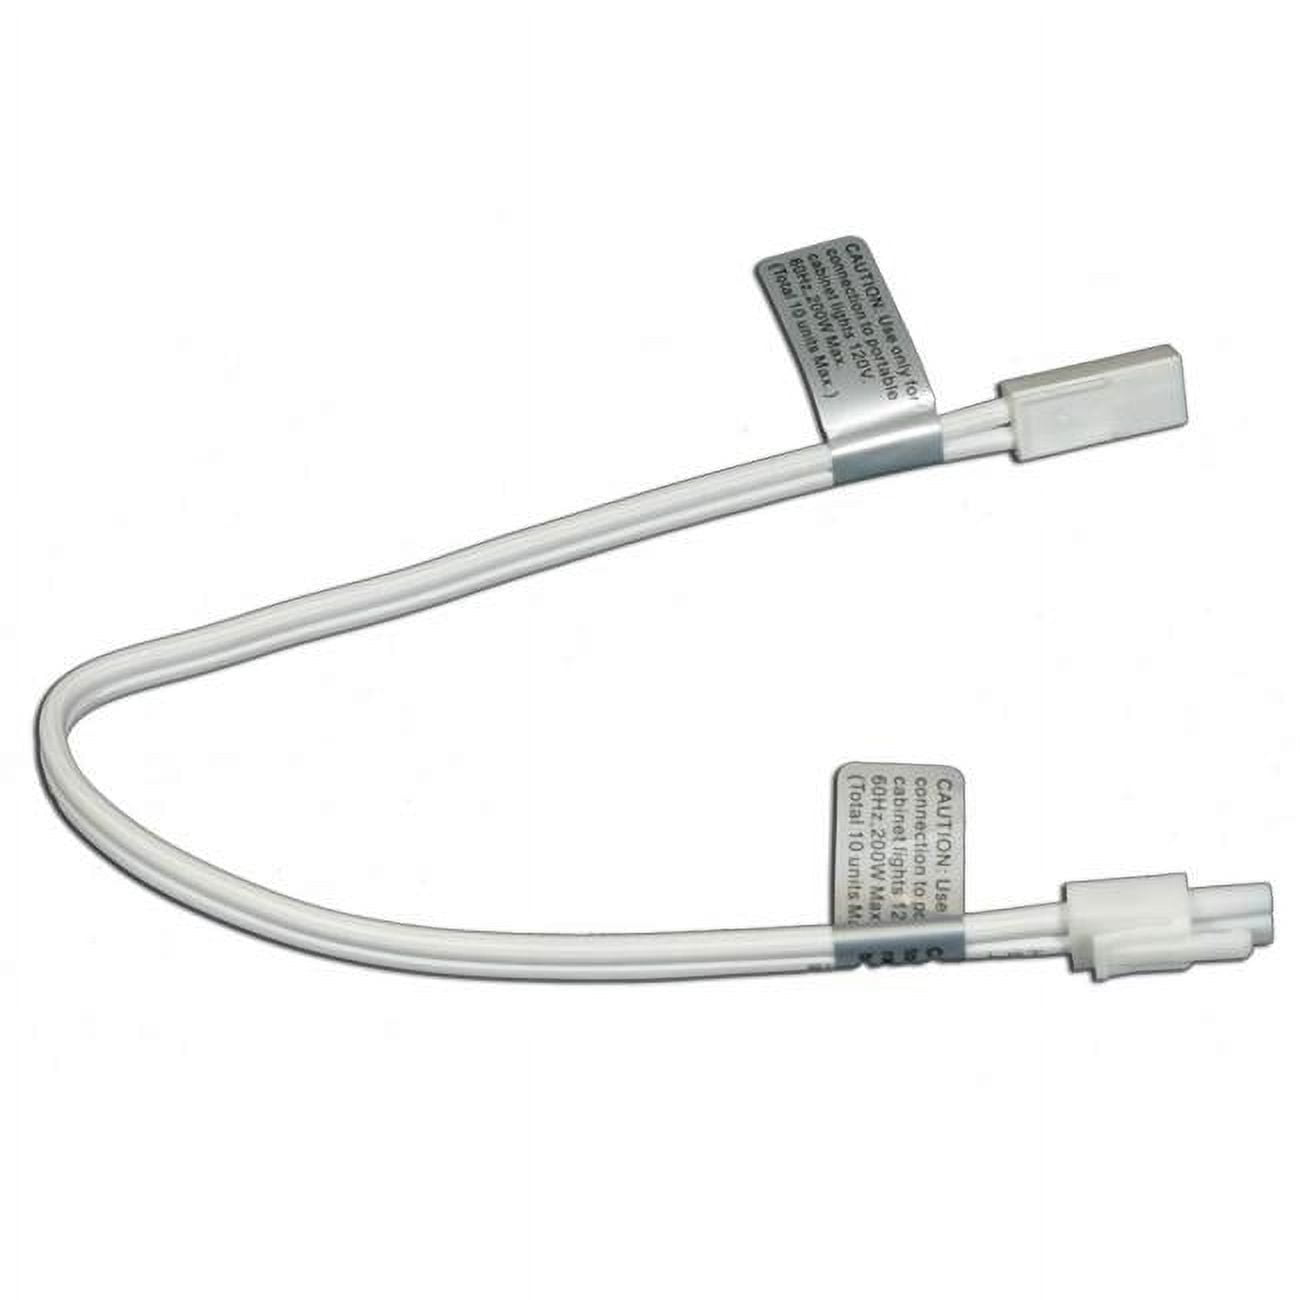 Picture of AmericanLighting ALLVPEX24WH-B 24 in. Linking Cable for LED Puck Lights, 120 V - White